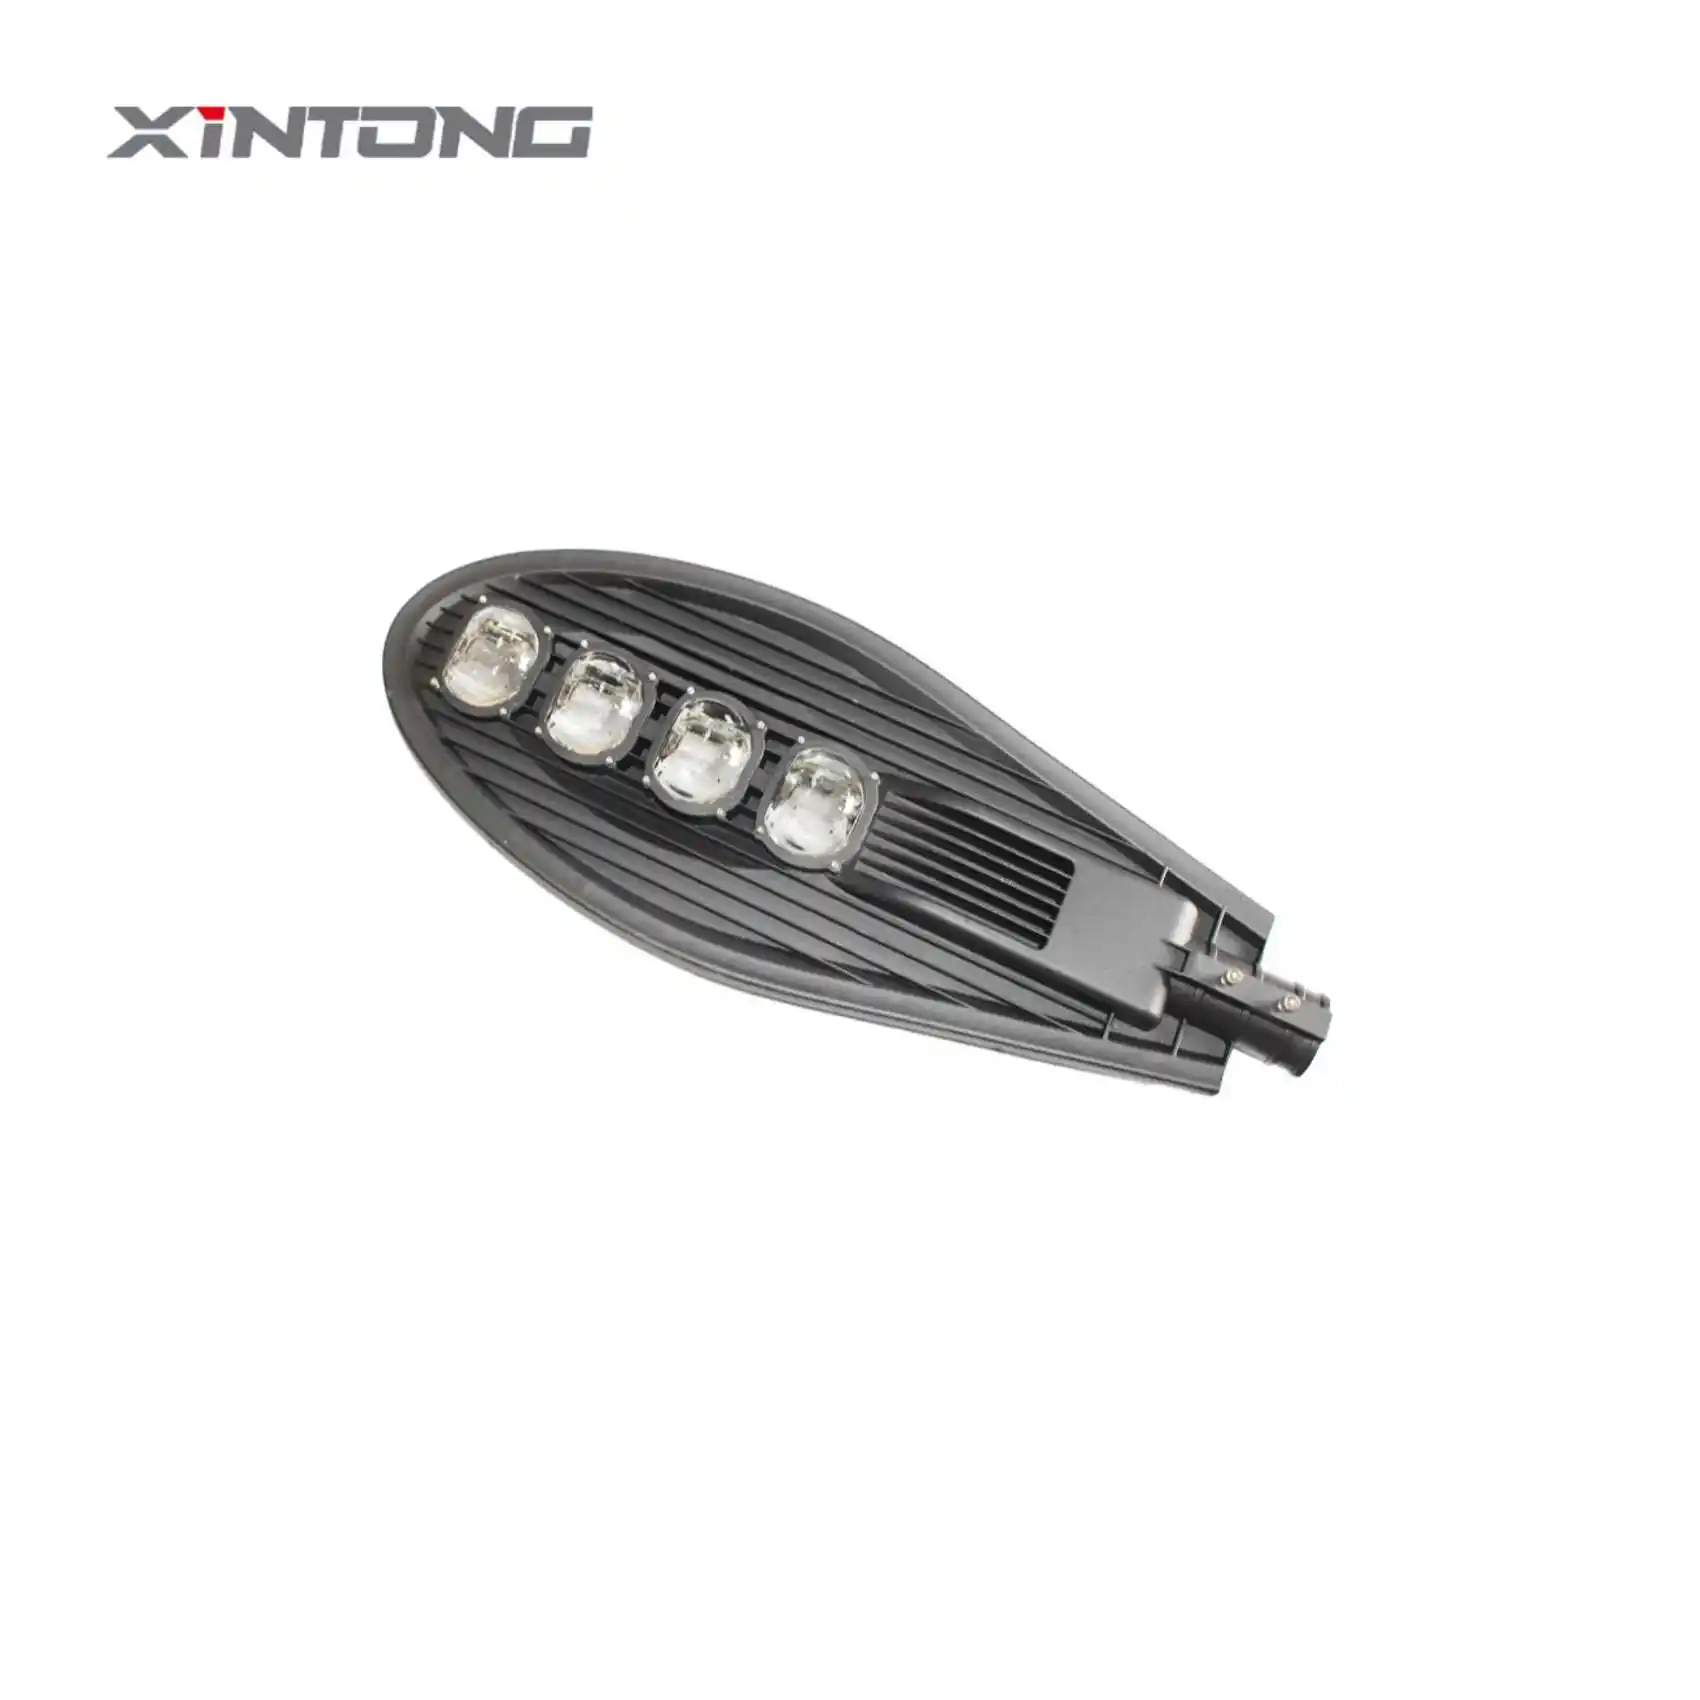 XINTONG smd high power led street light free porn tube cup 400w led street light